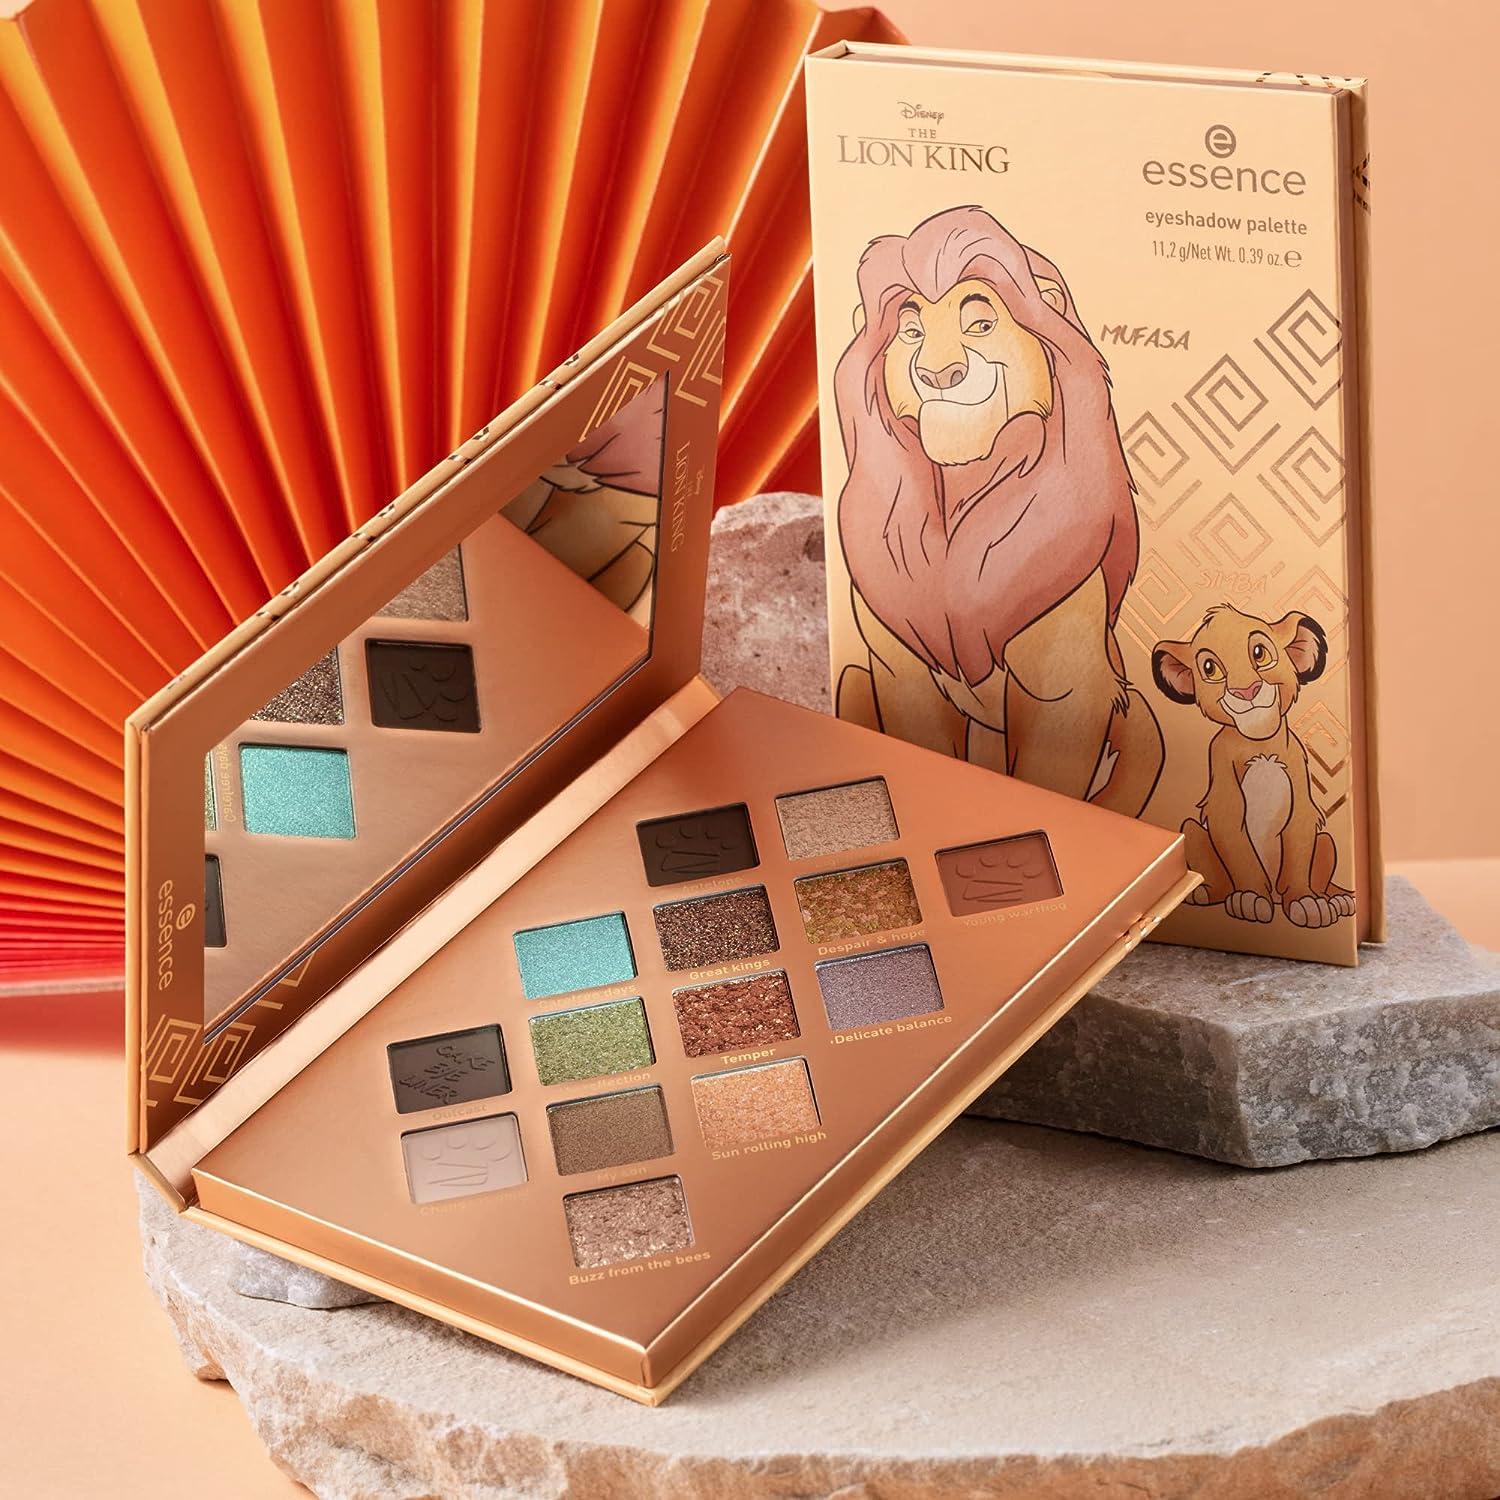 essence | The Lion King Eyeshadow Palette | Limited Edition Disney  Collection | 14 Highly Pigmented Easy to Blend Shadows | Matte & Metallic |  Vegan & Cruelty Free | Paraben Oil